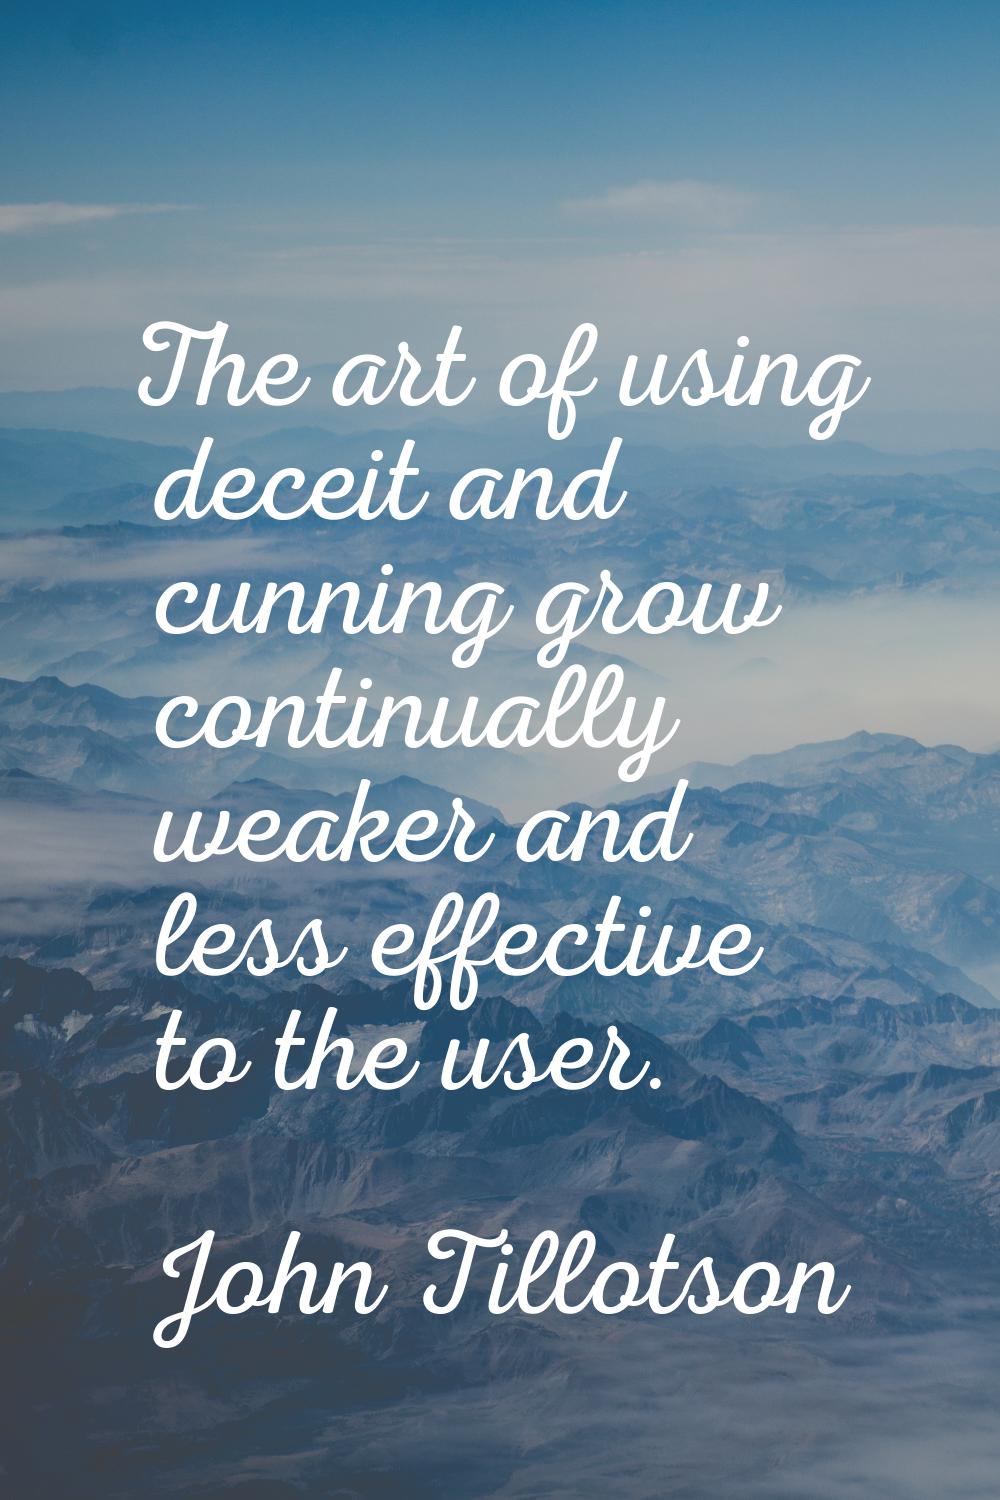 The art of using deceit and cunning grow continually weaker and less effective to the user.